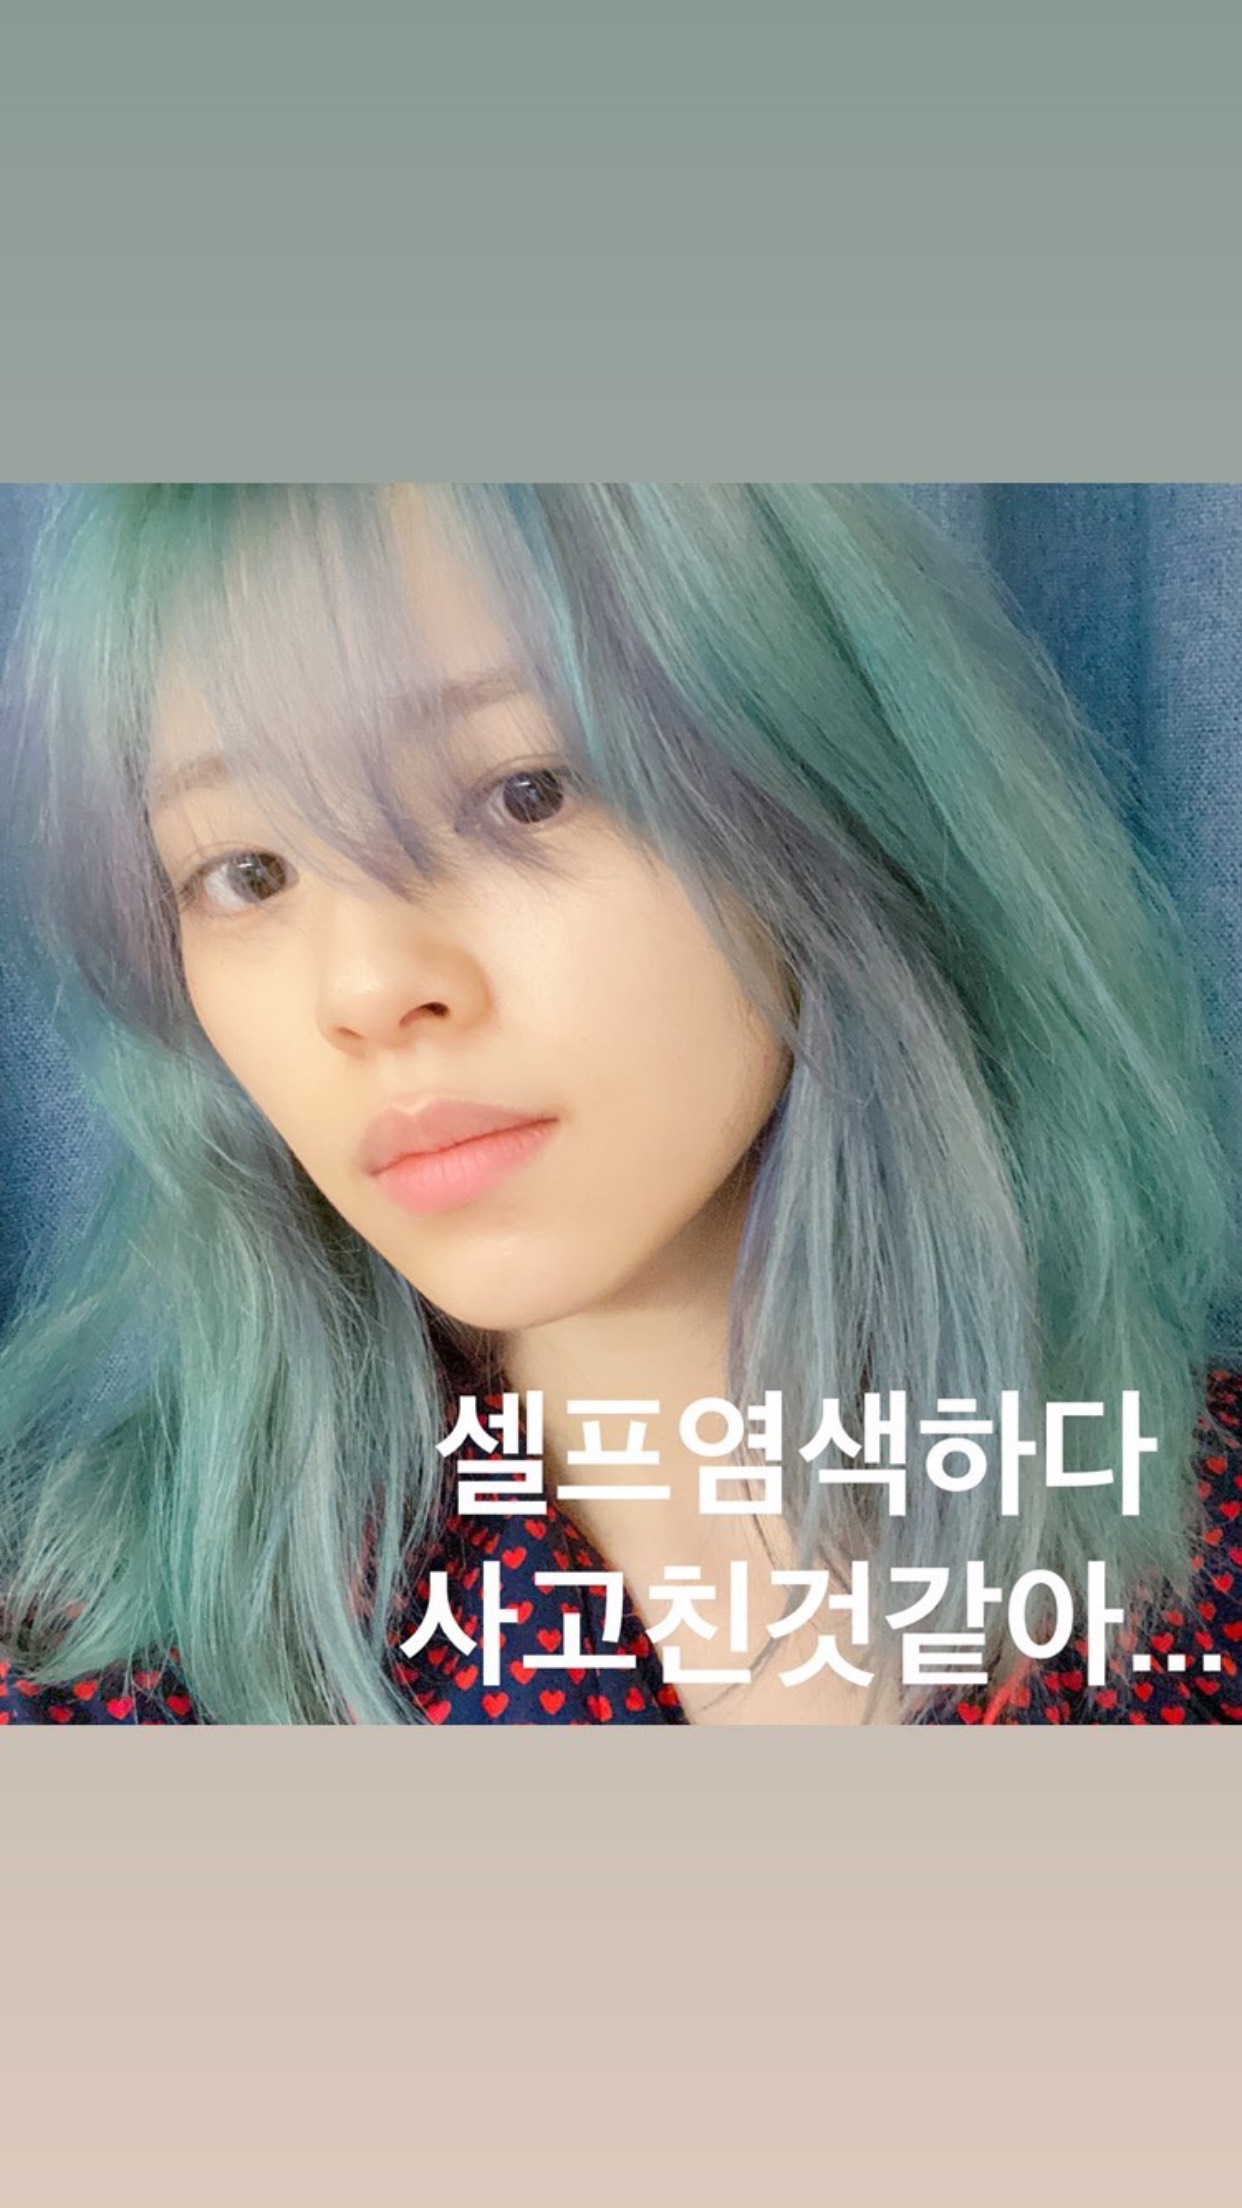 jeongyeon-twice-reveals-new-hairstyle-dyed-herself-1